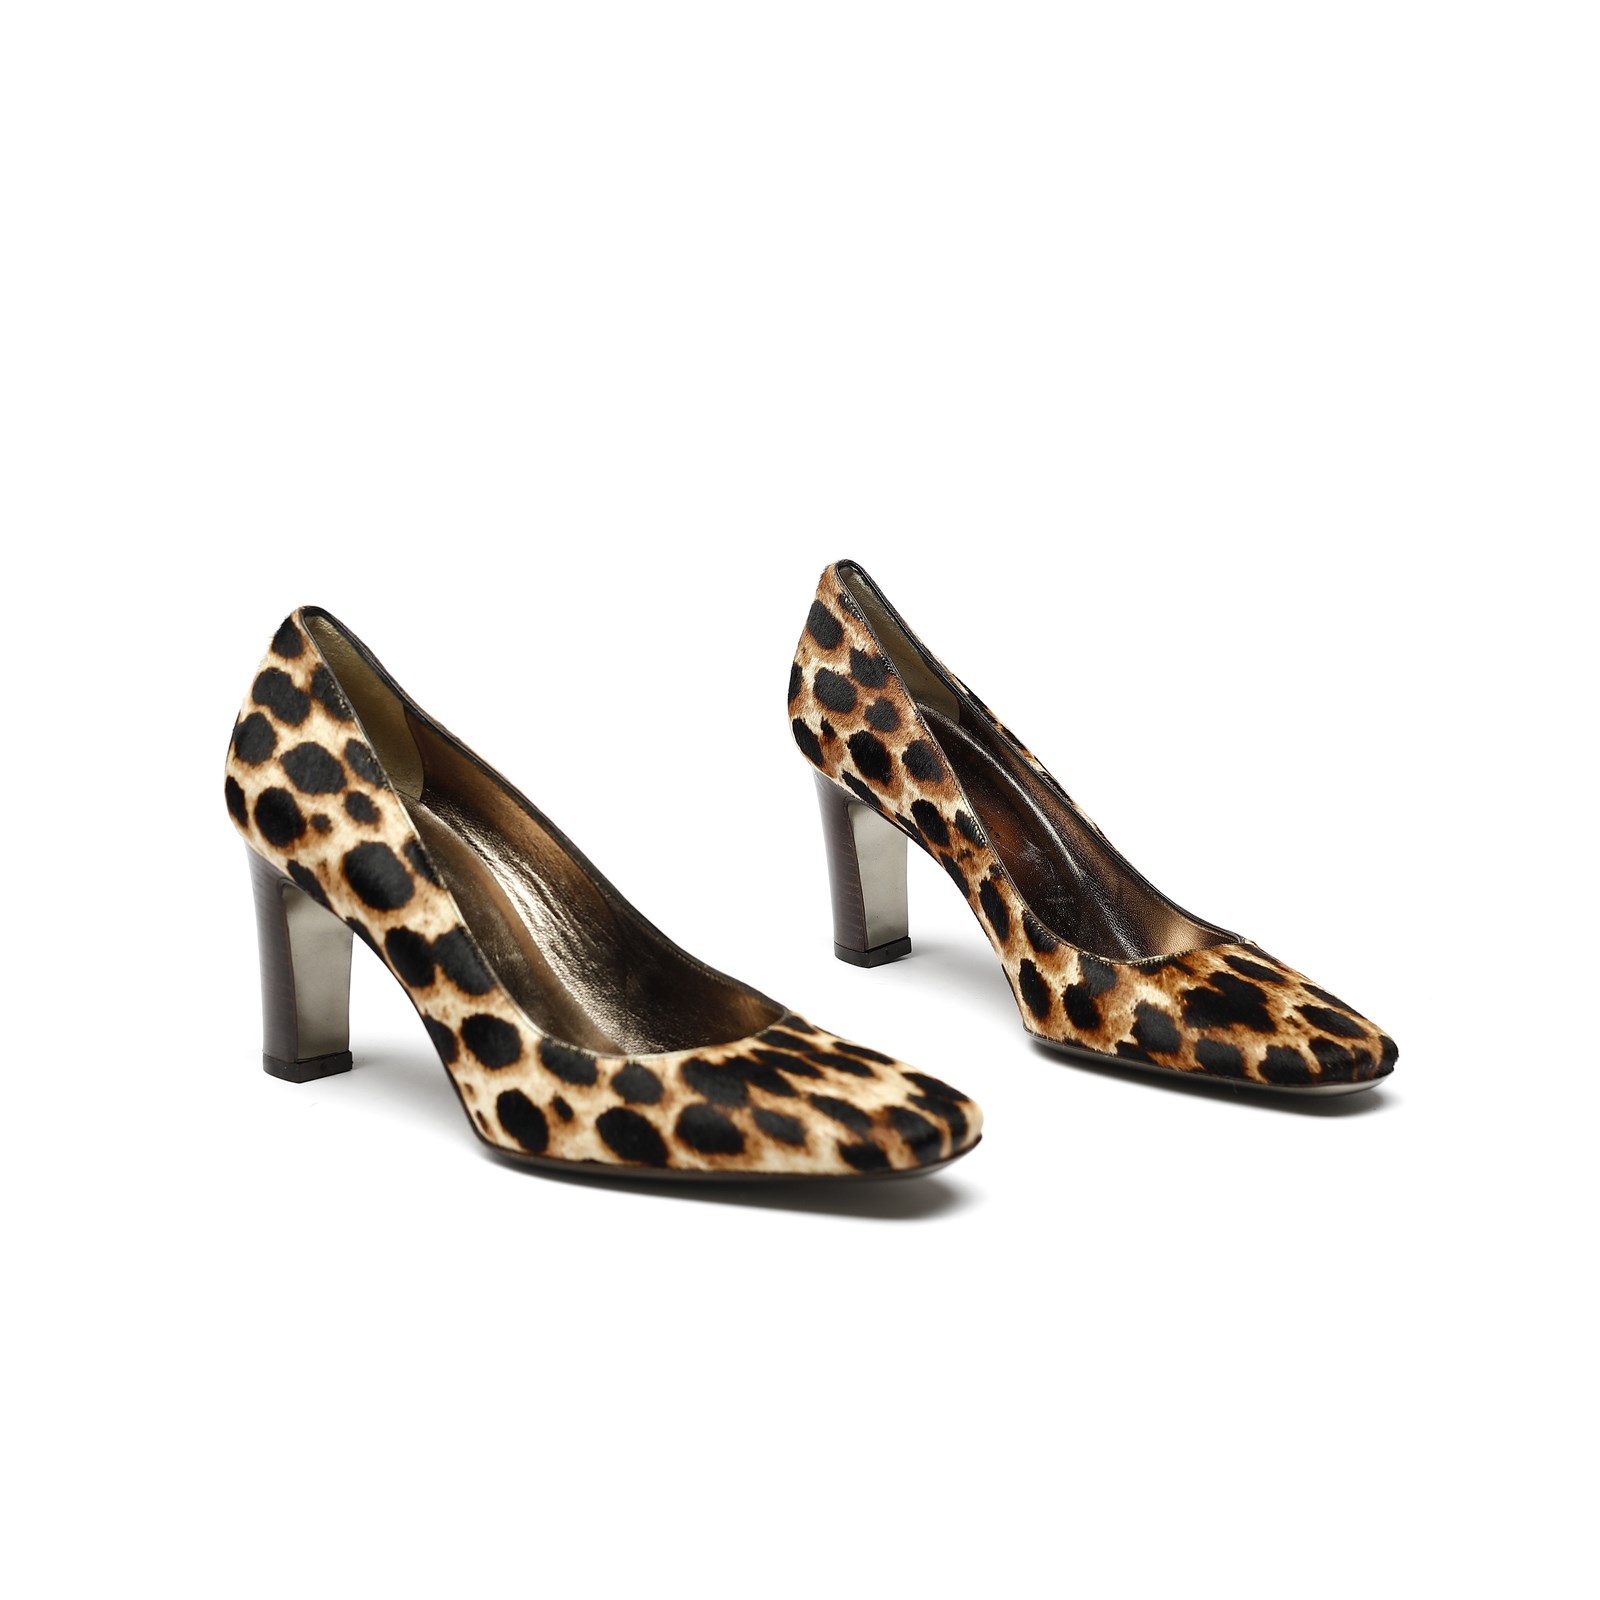 Decollete shoes in pony fur spotted print n. 37. (Dolce E Gabbana )